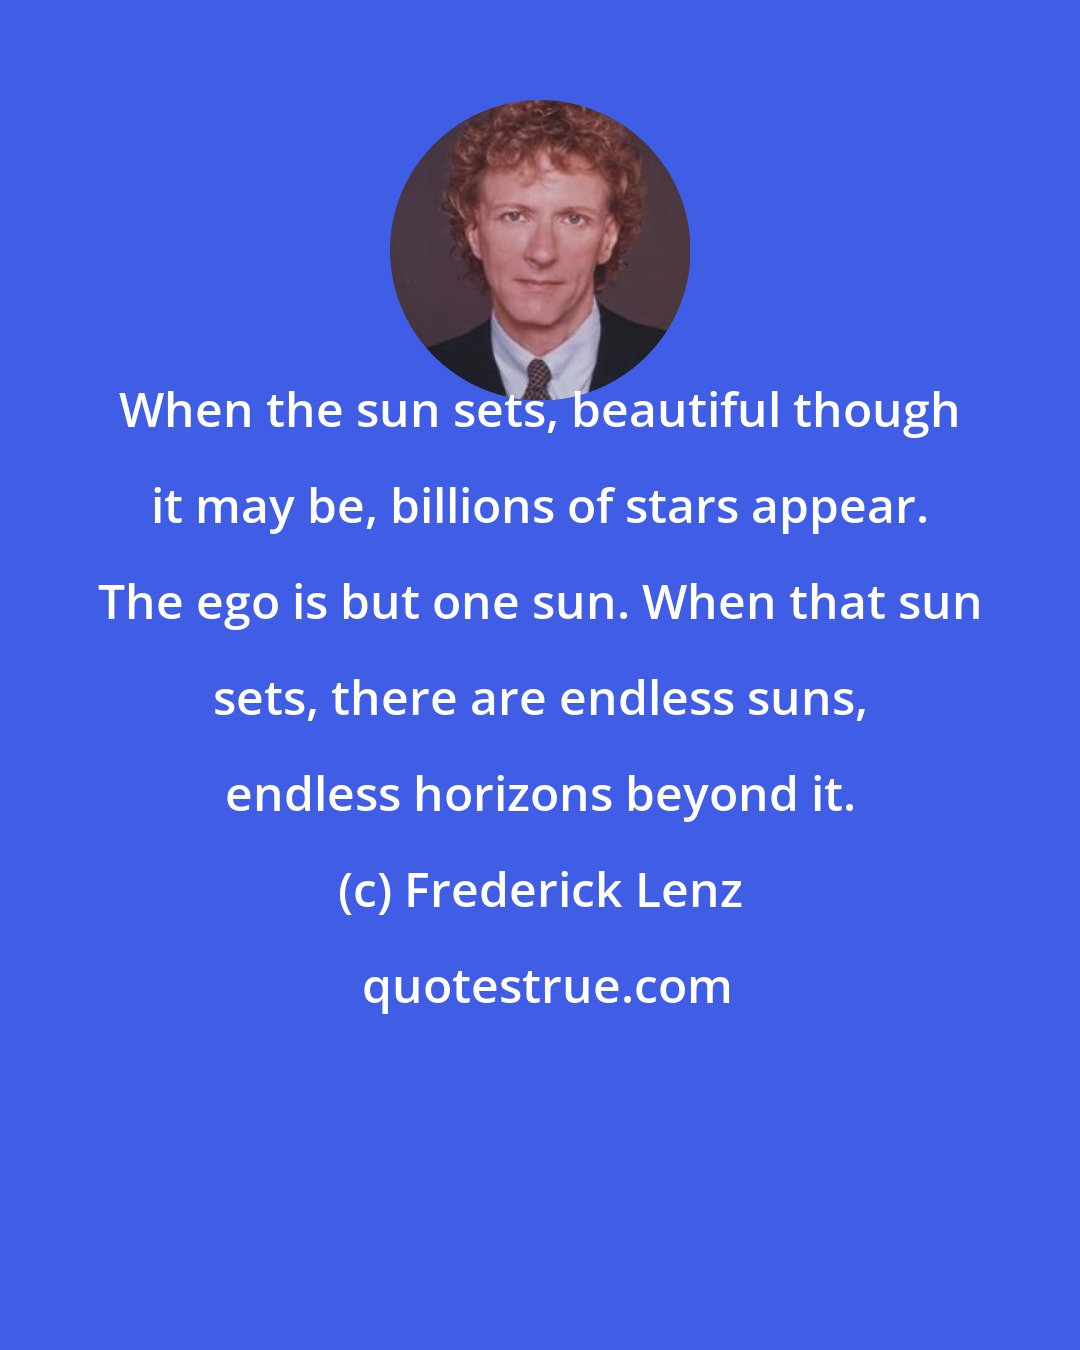 Frederick Lenz: When the sun sets, beautiful though it may be, billions of stars appear. The ego is but one sun. When that sun sets, there are endless suns, endless horizons beyond it.